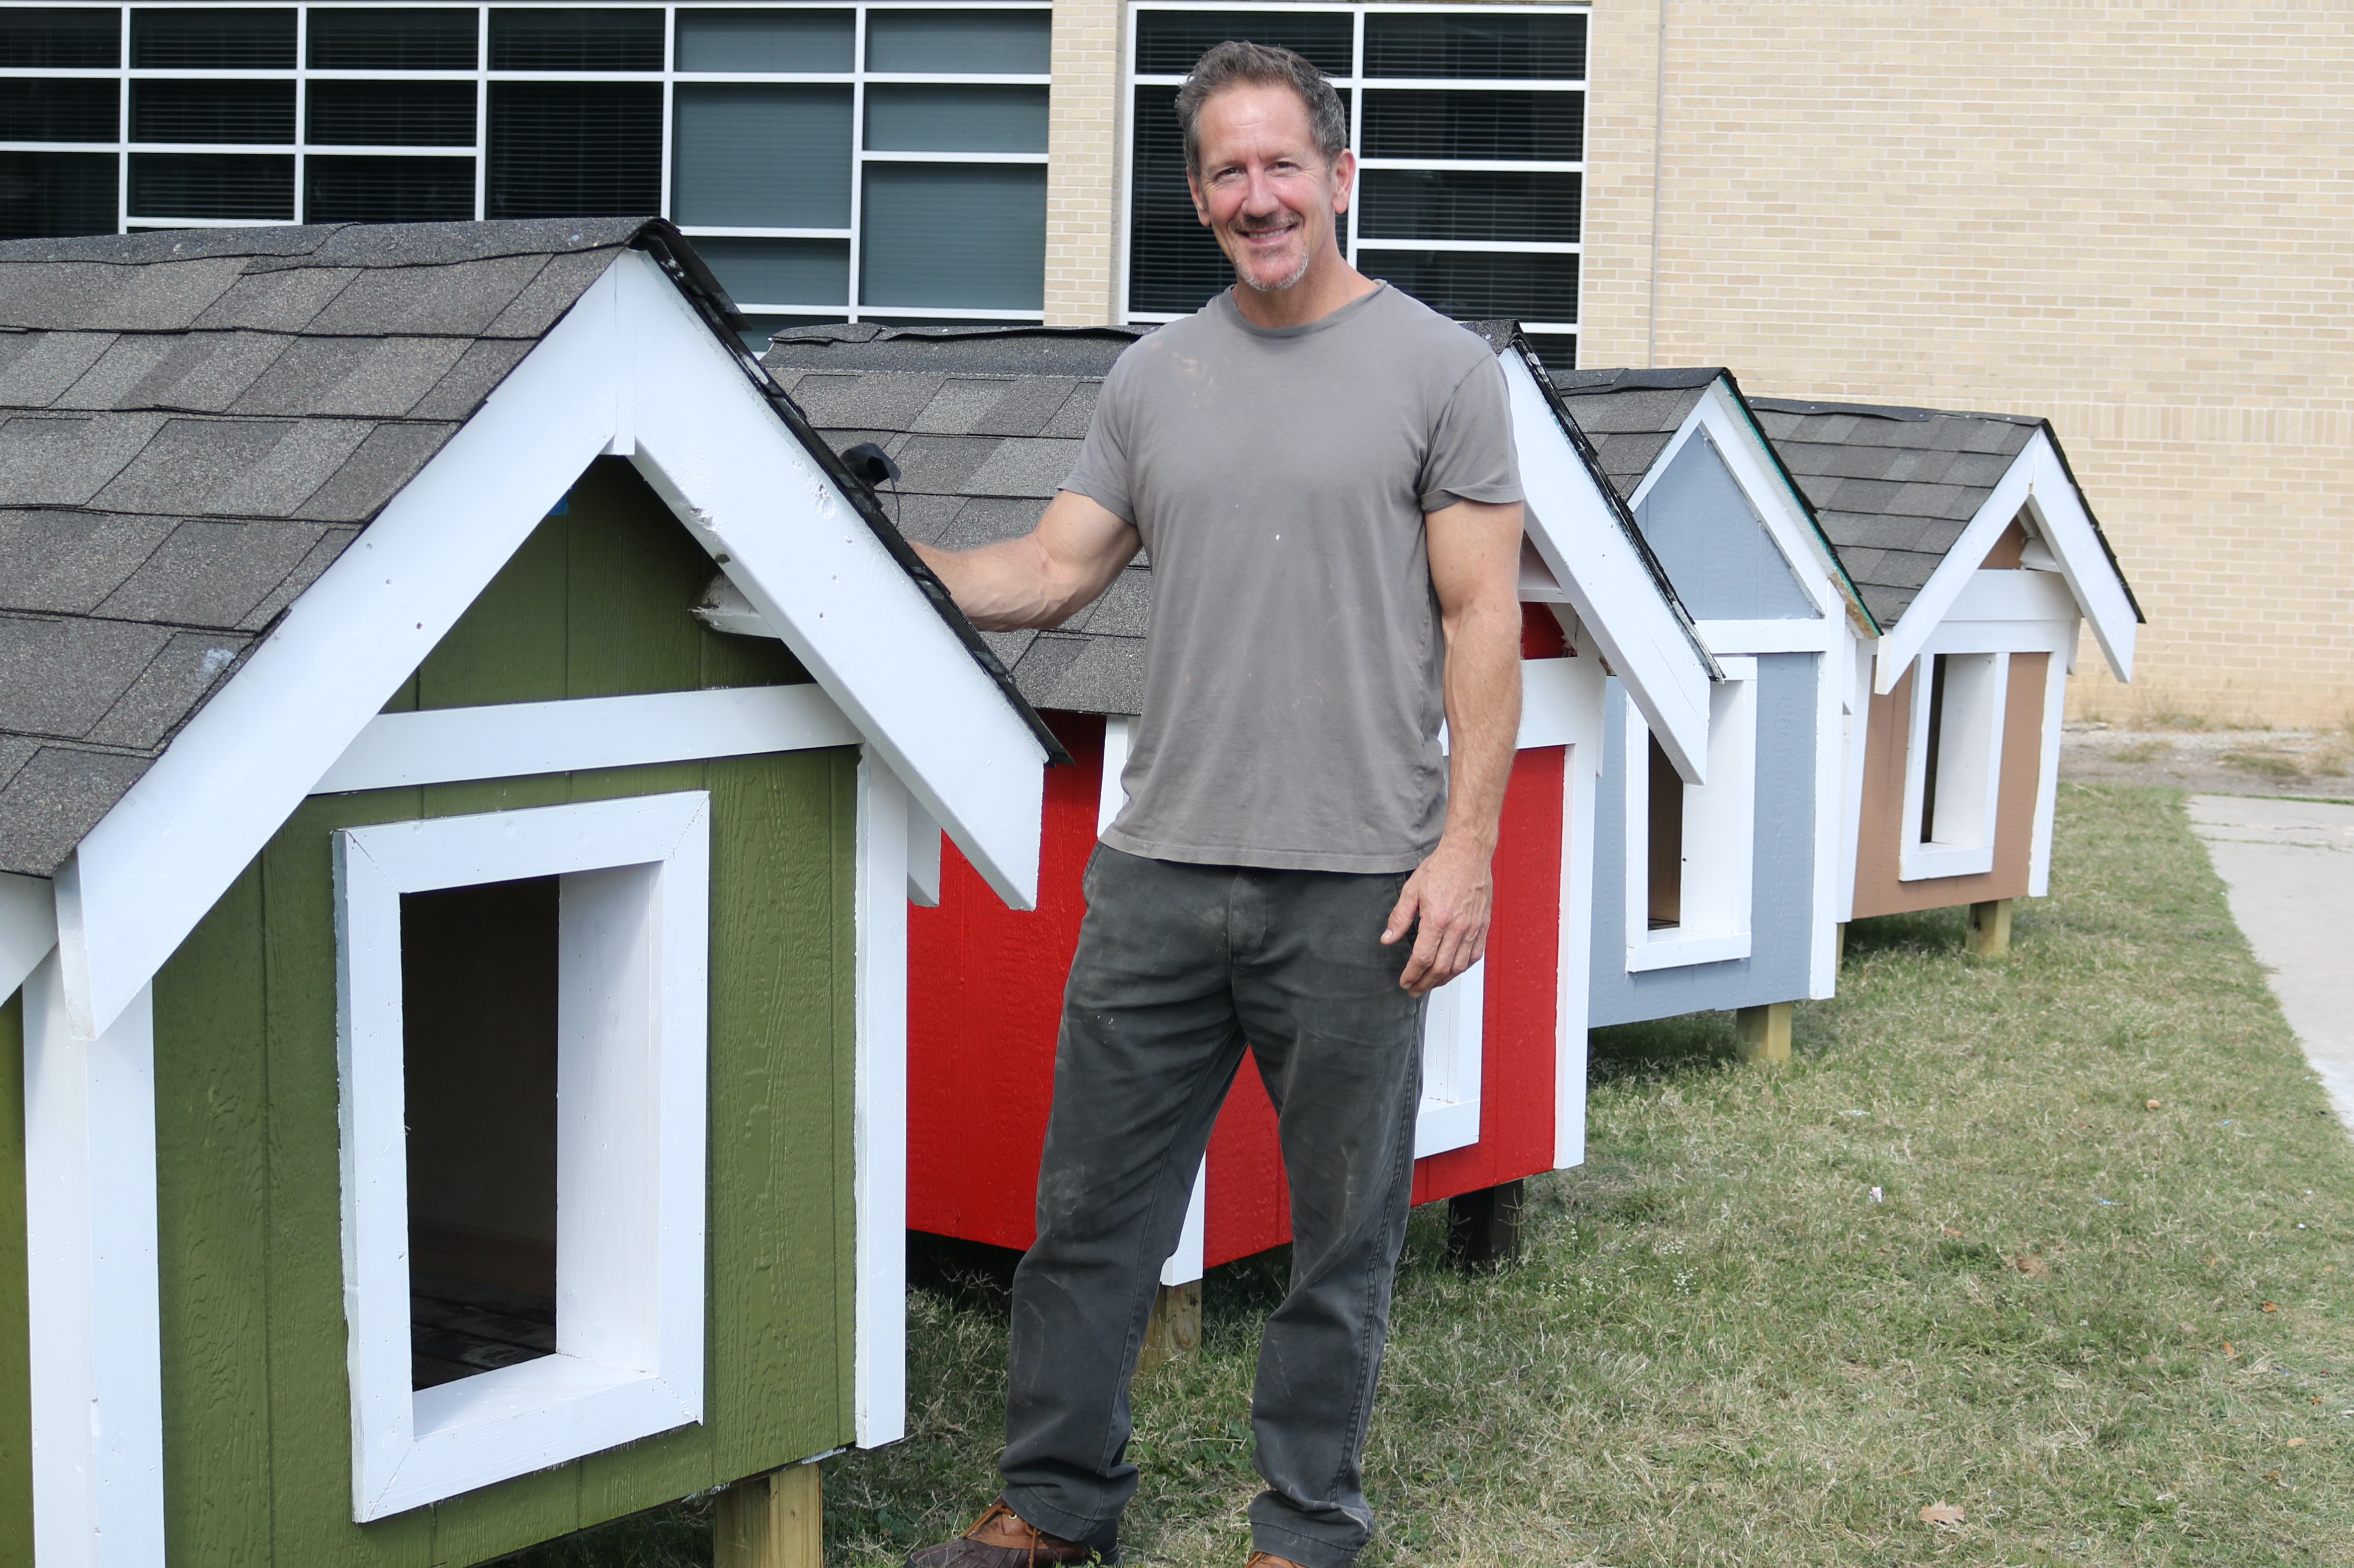 Mr. Guillory with houses